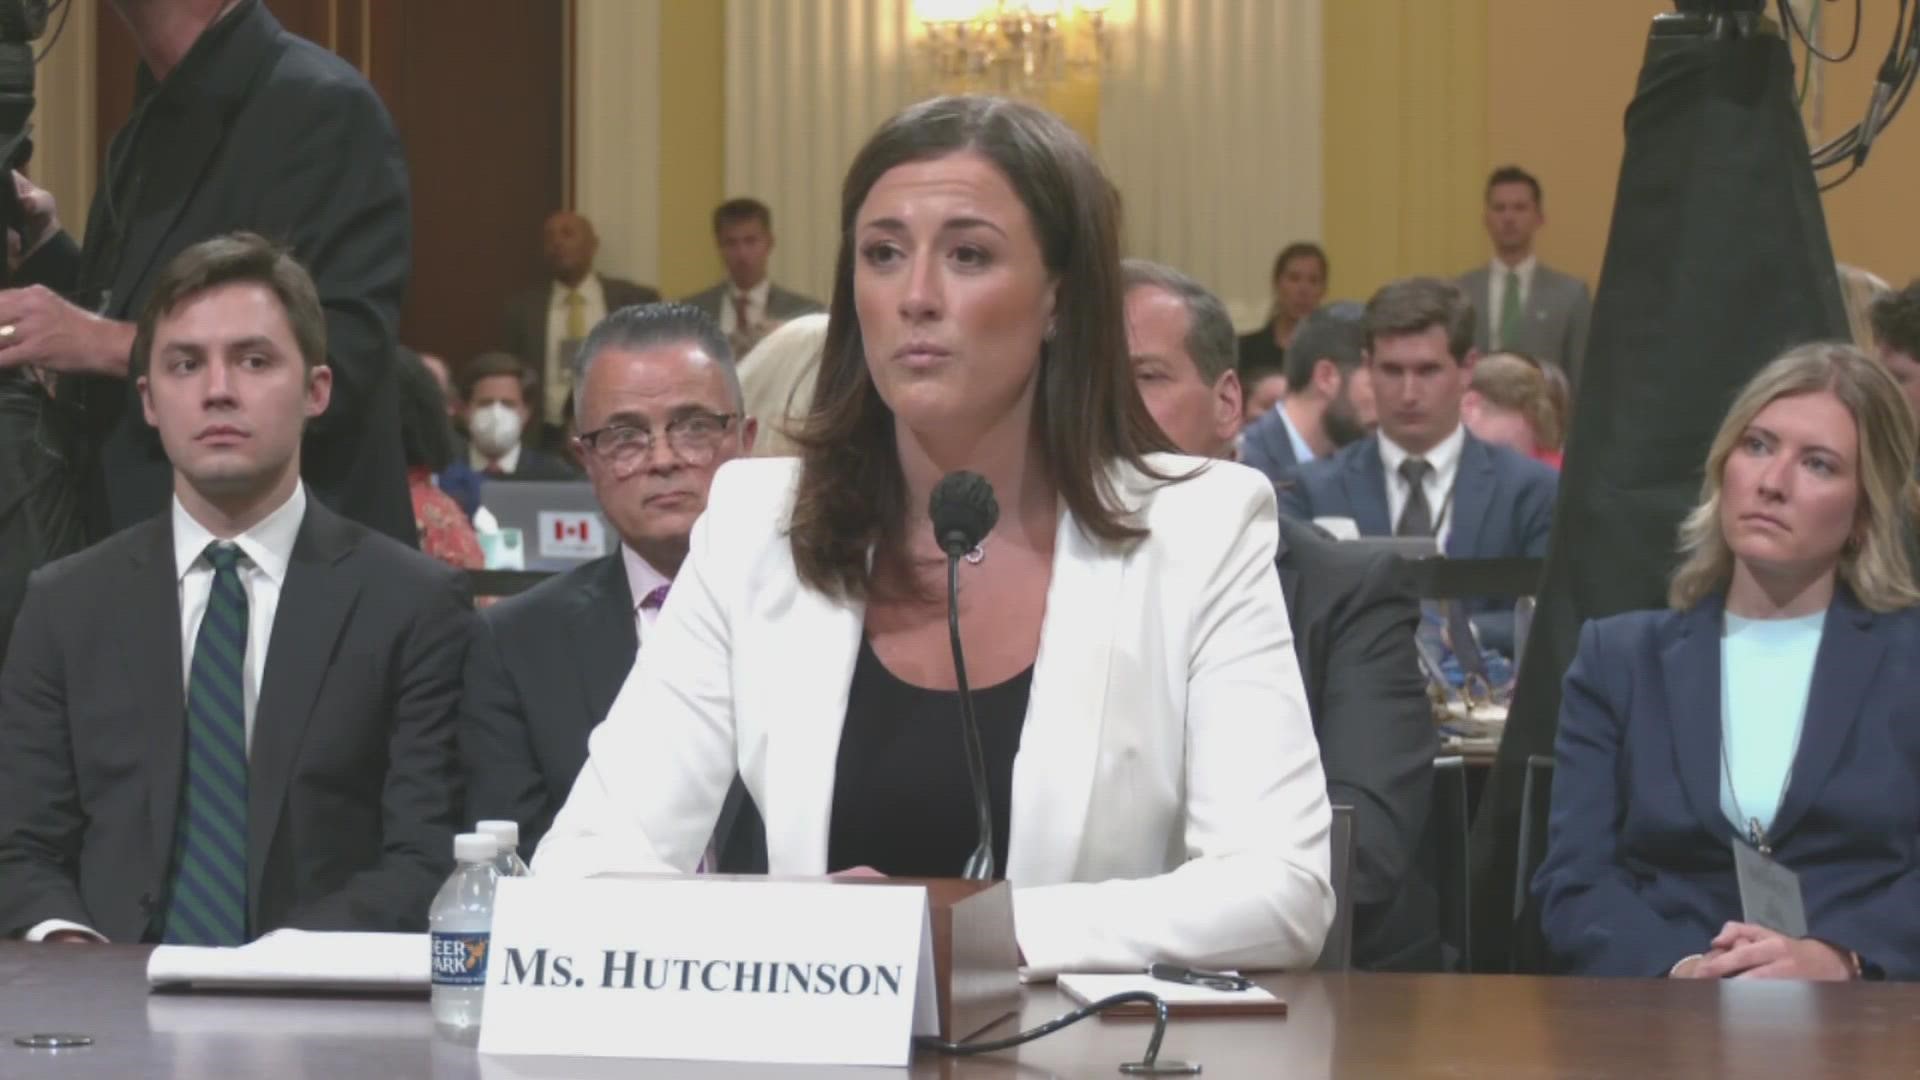 Hutchinson, a top aide at Trump's White House, testified to the Jan. 6 House panel.